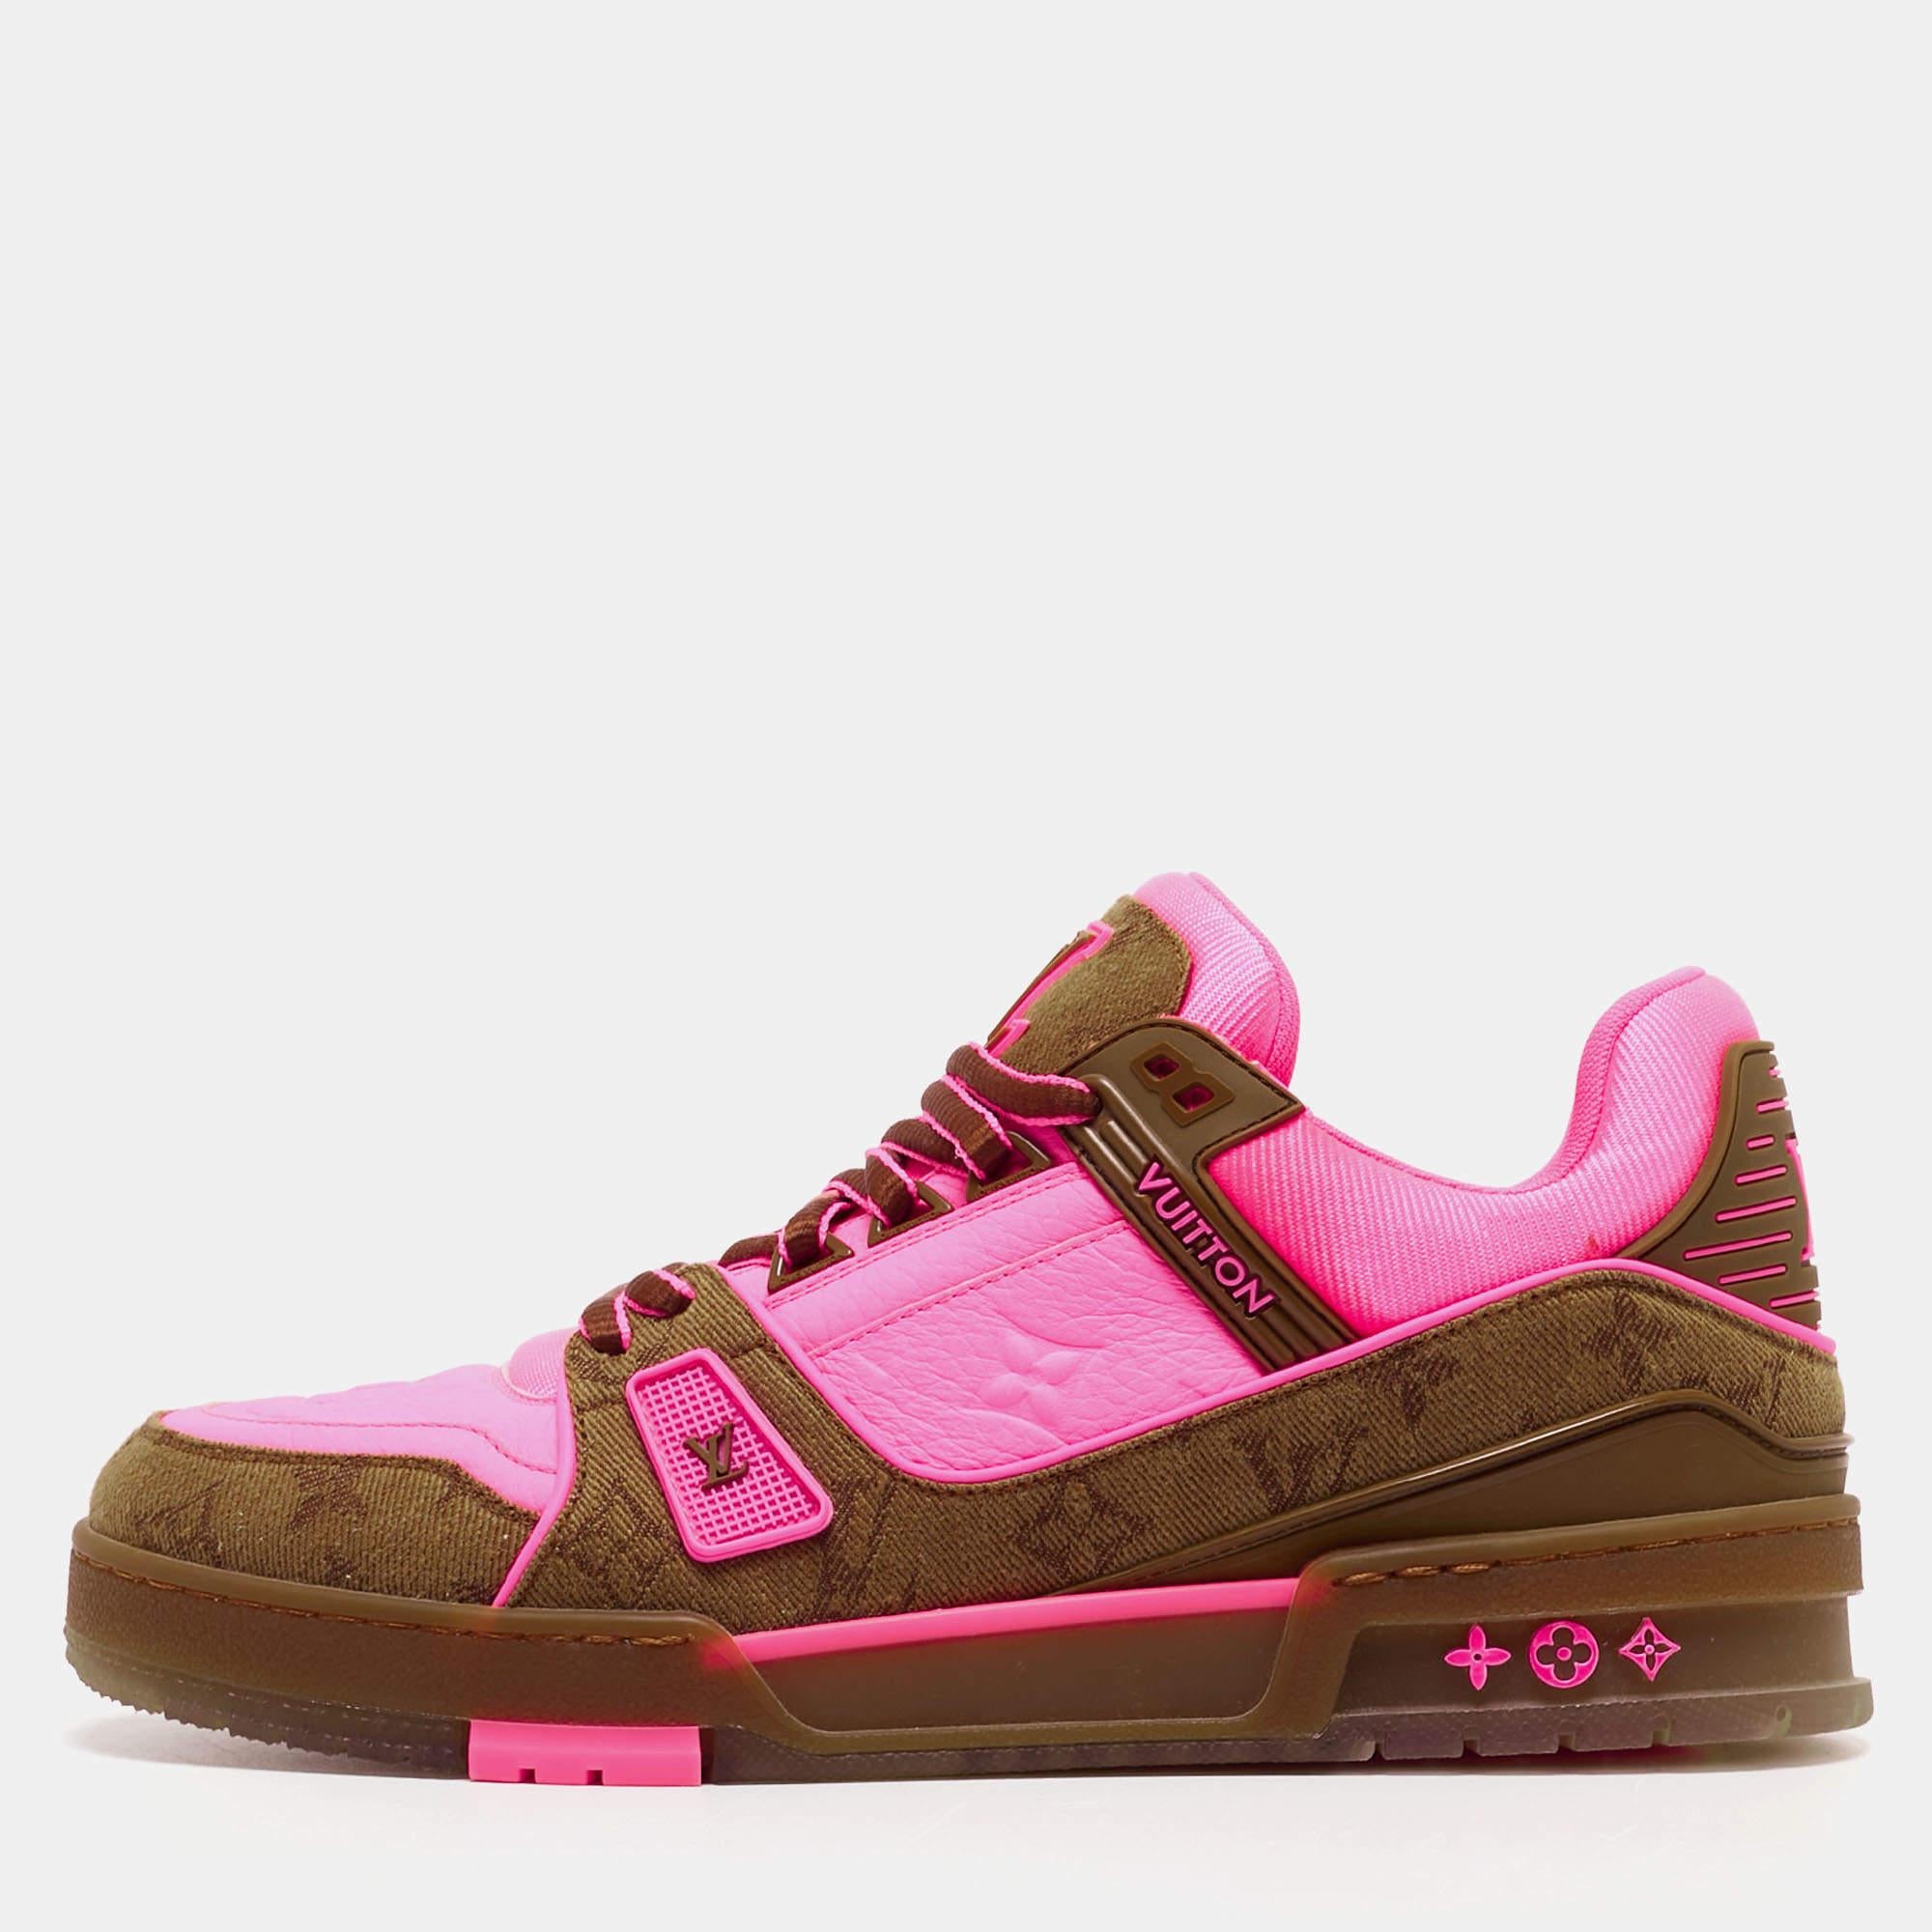 Louis Vuitton Neon Pink/Brown Monogram Leather and Canvas LV Trainer Sneakers Si 2